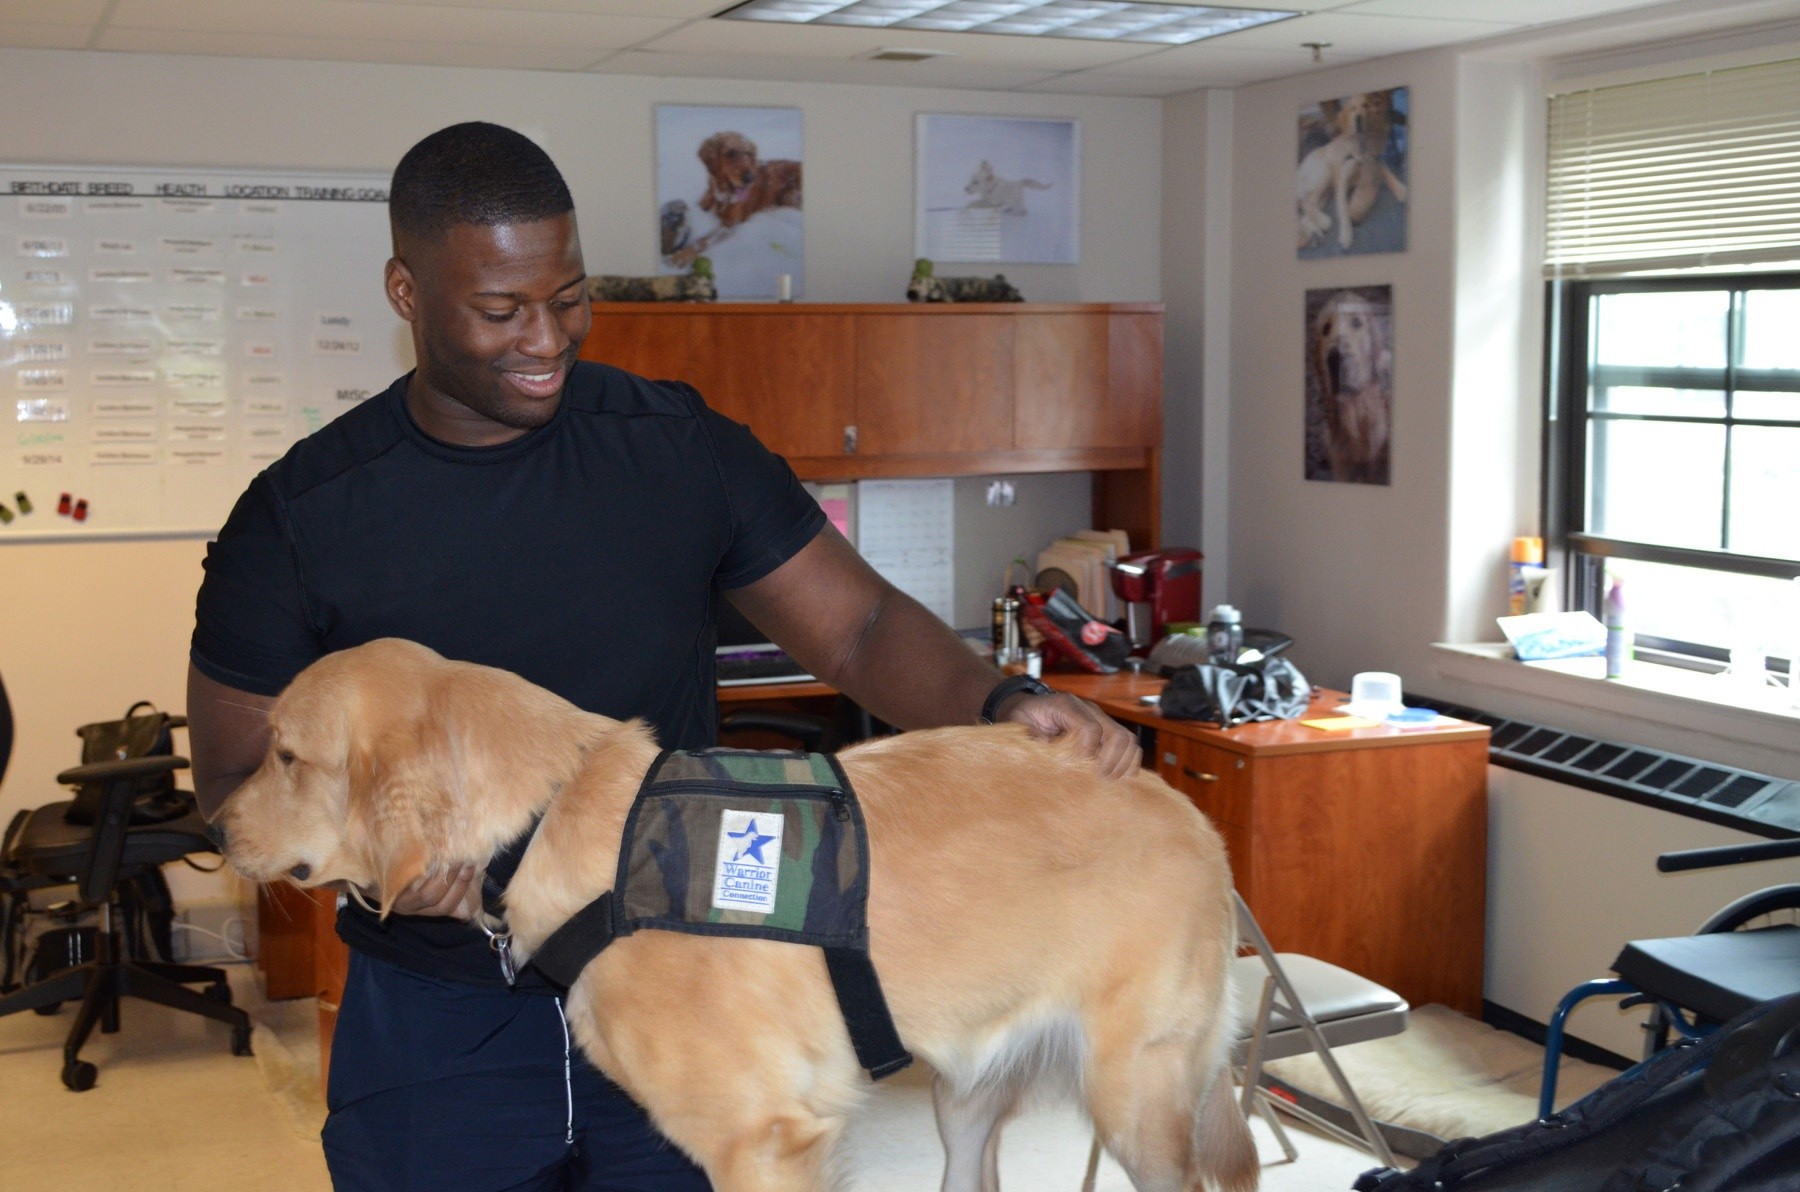 Warriors receive therapy through service dog training program | Article |  The United States Army